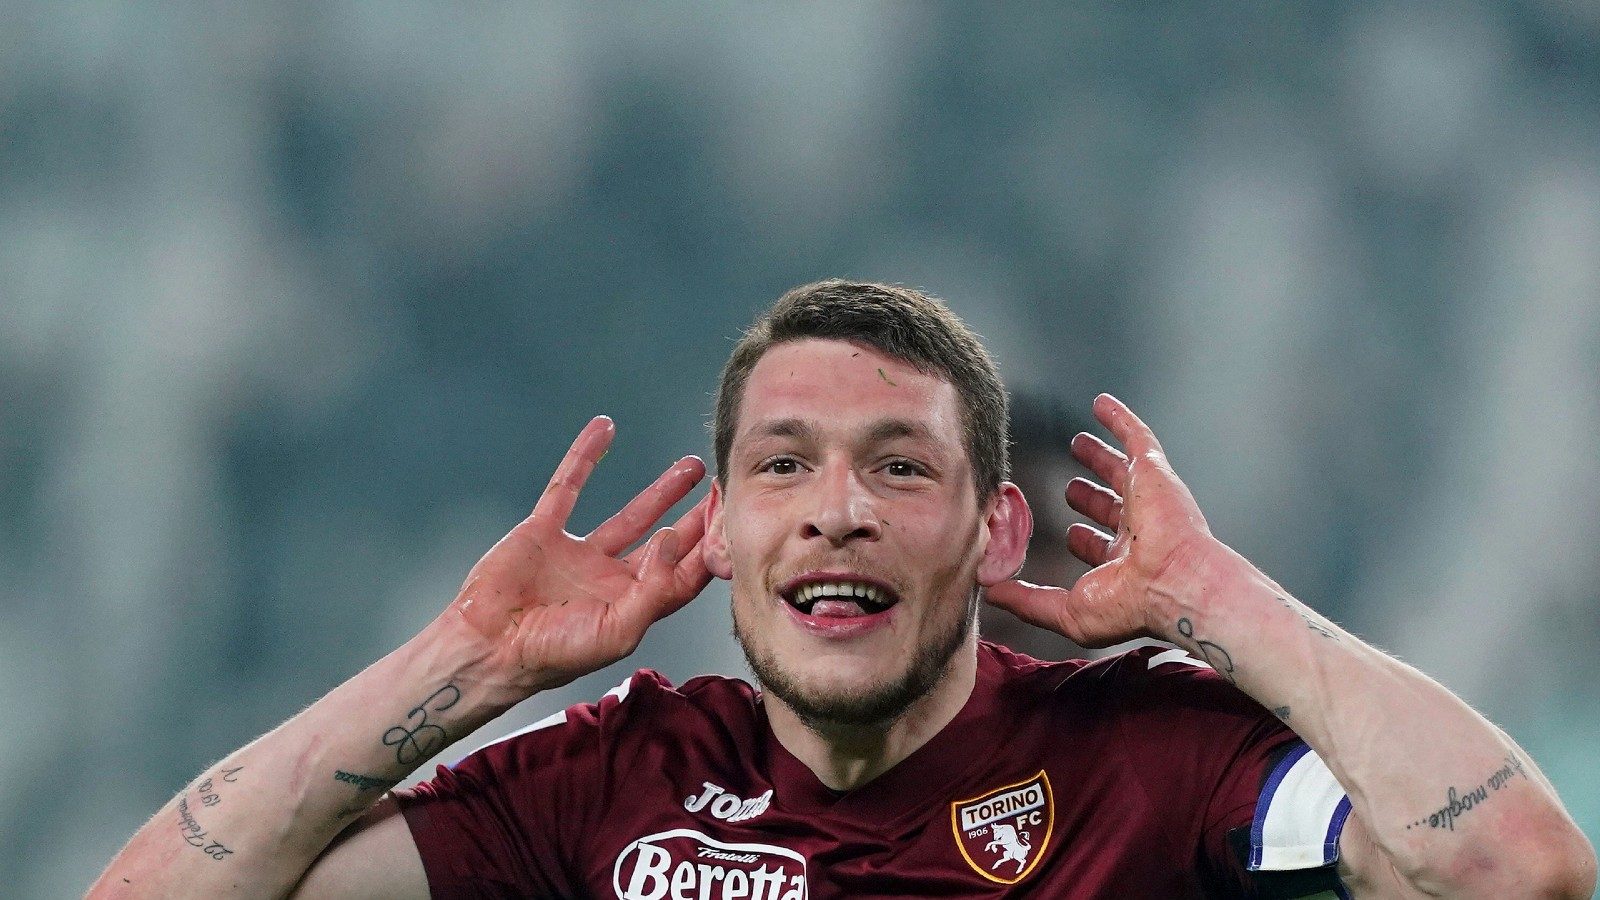 Andrea-Belotti-Earns-Torino-Deserved-Derby-Point-at-Juventus